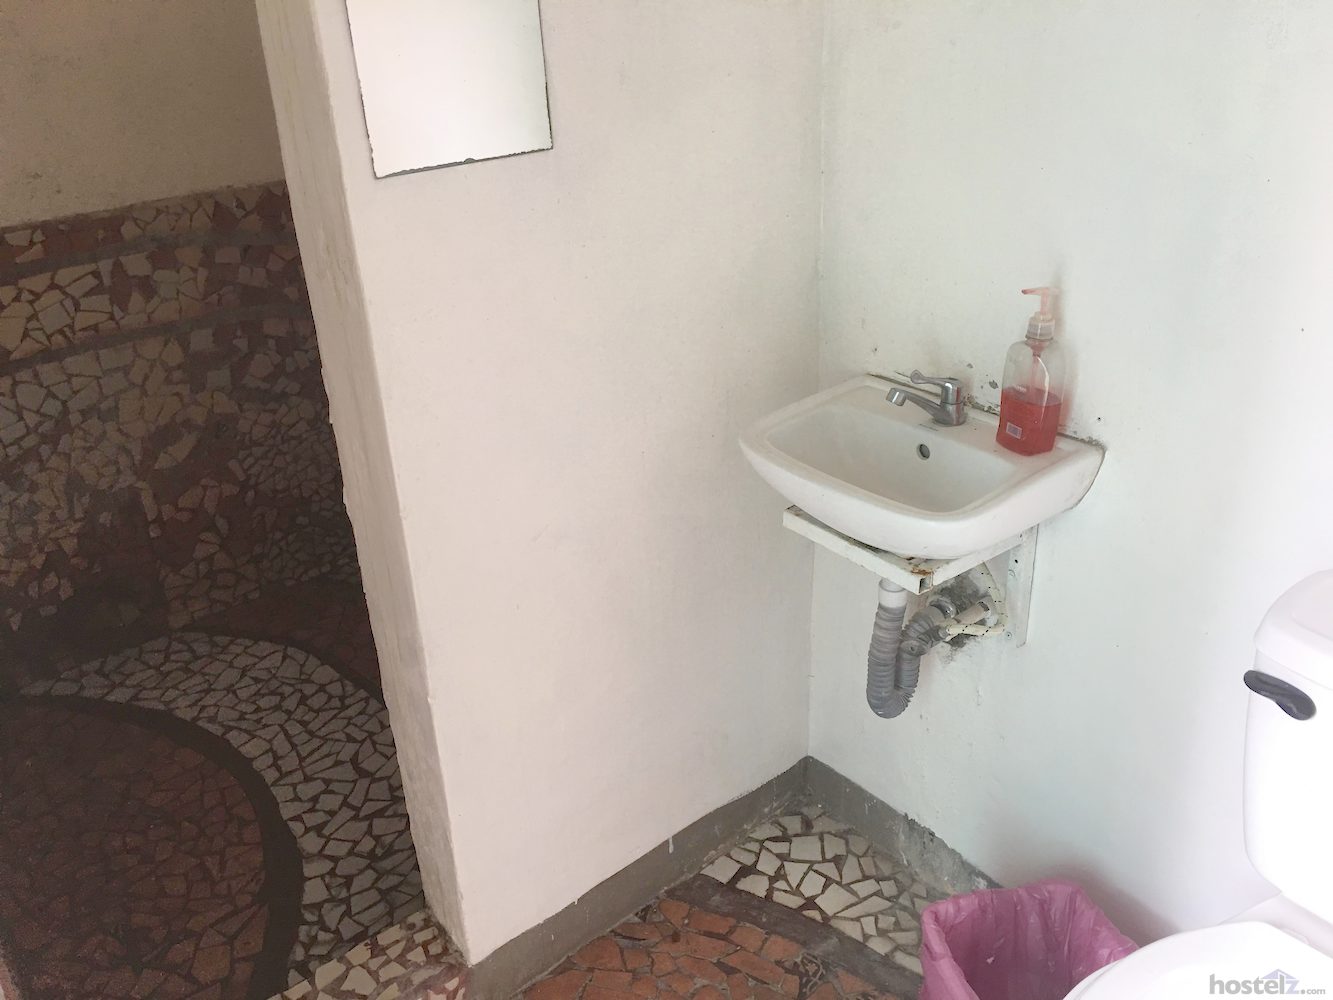 one of the shared bathrooms